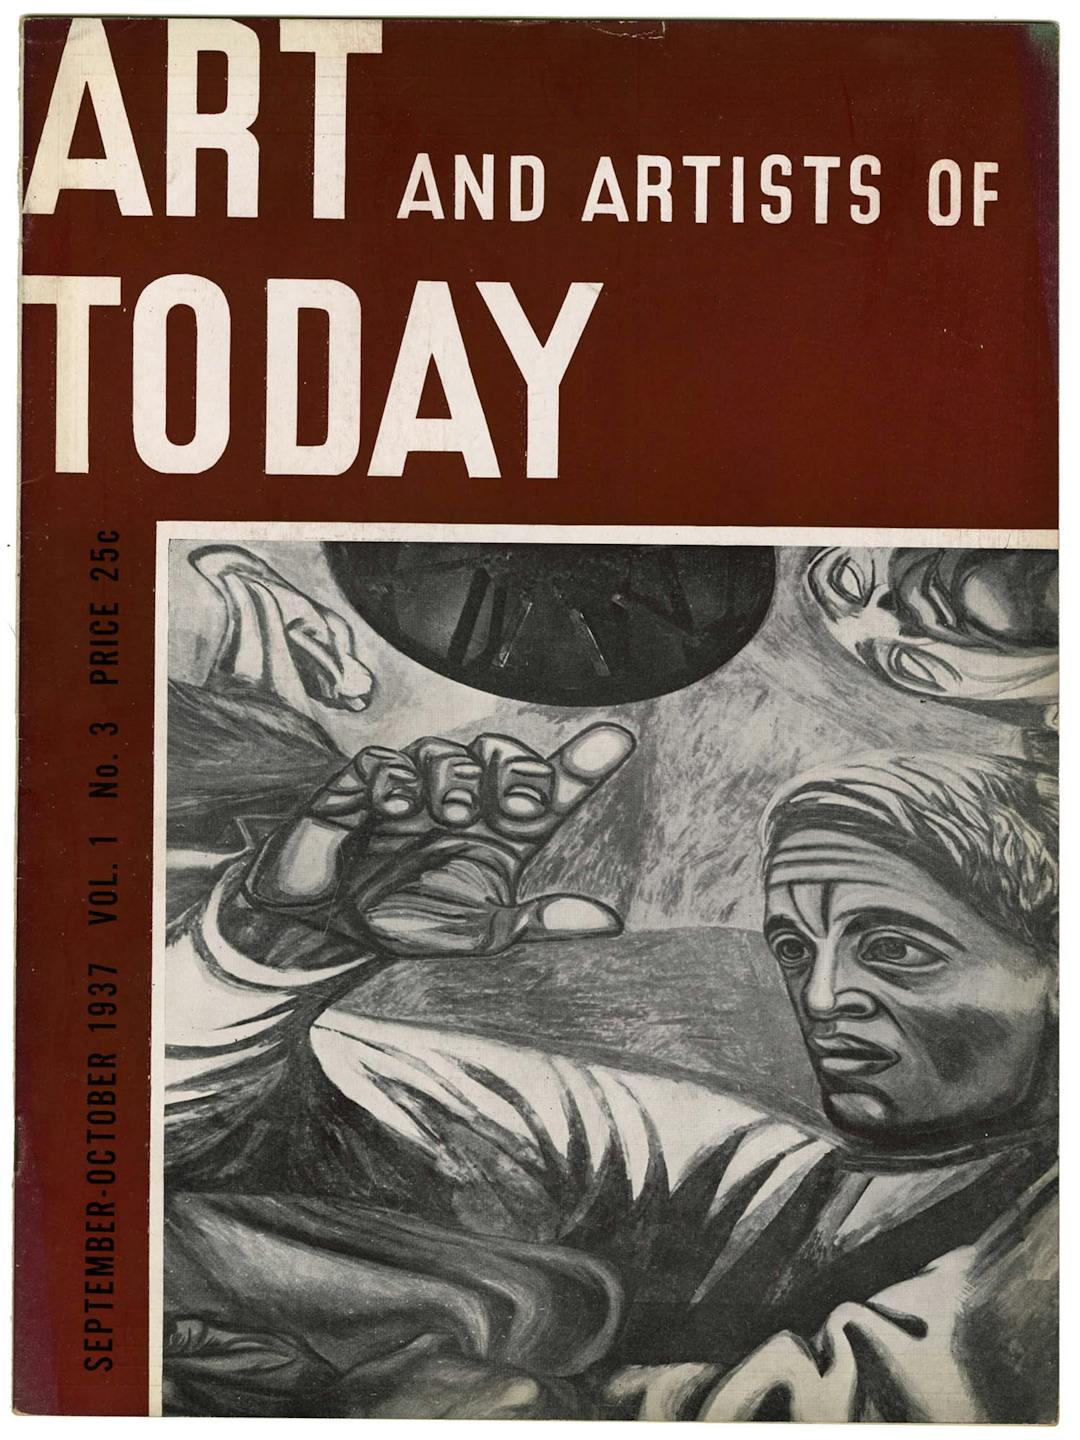 Art and Artists of Today, Vol. 1 no. 3, September–October 1937 – The Richard Pousette-Dart Foundation